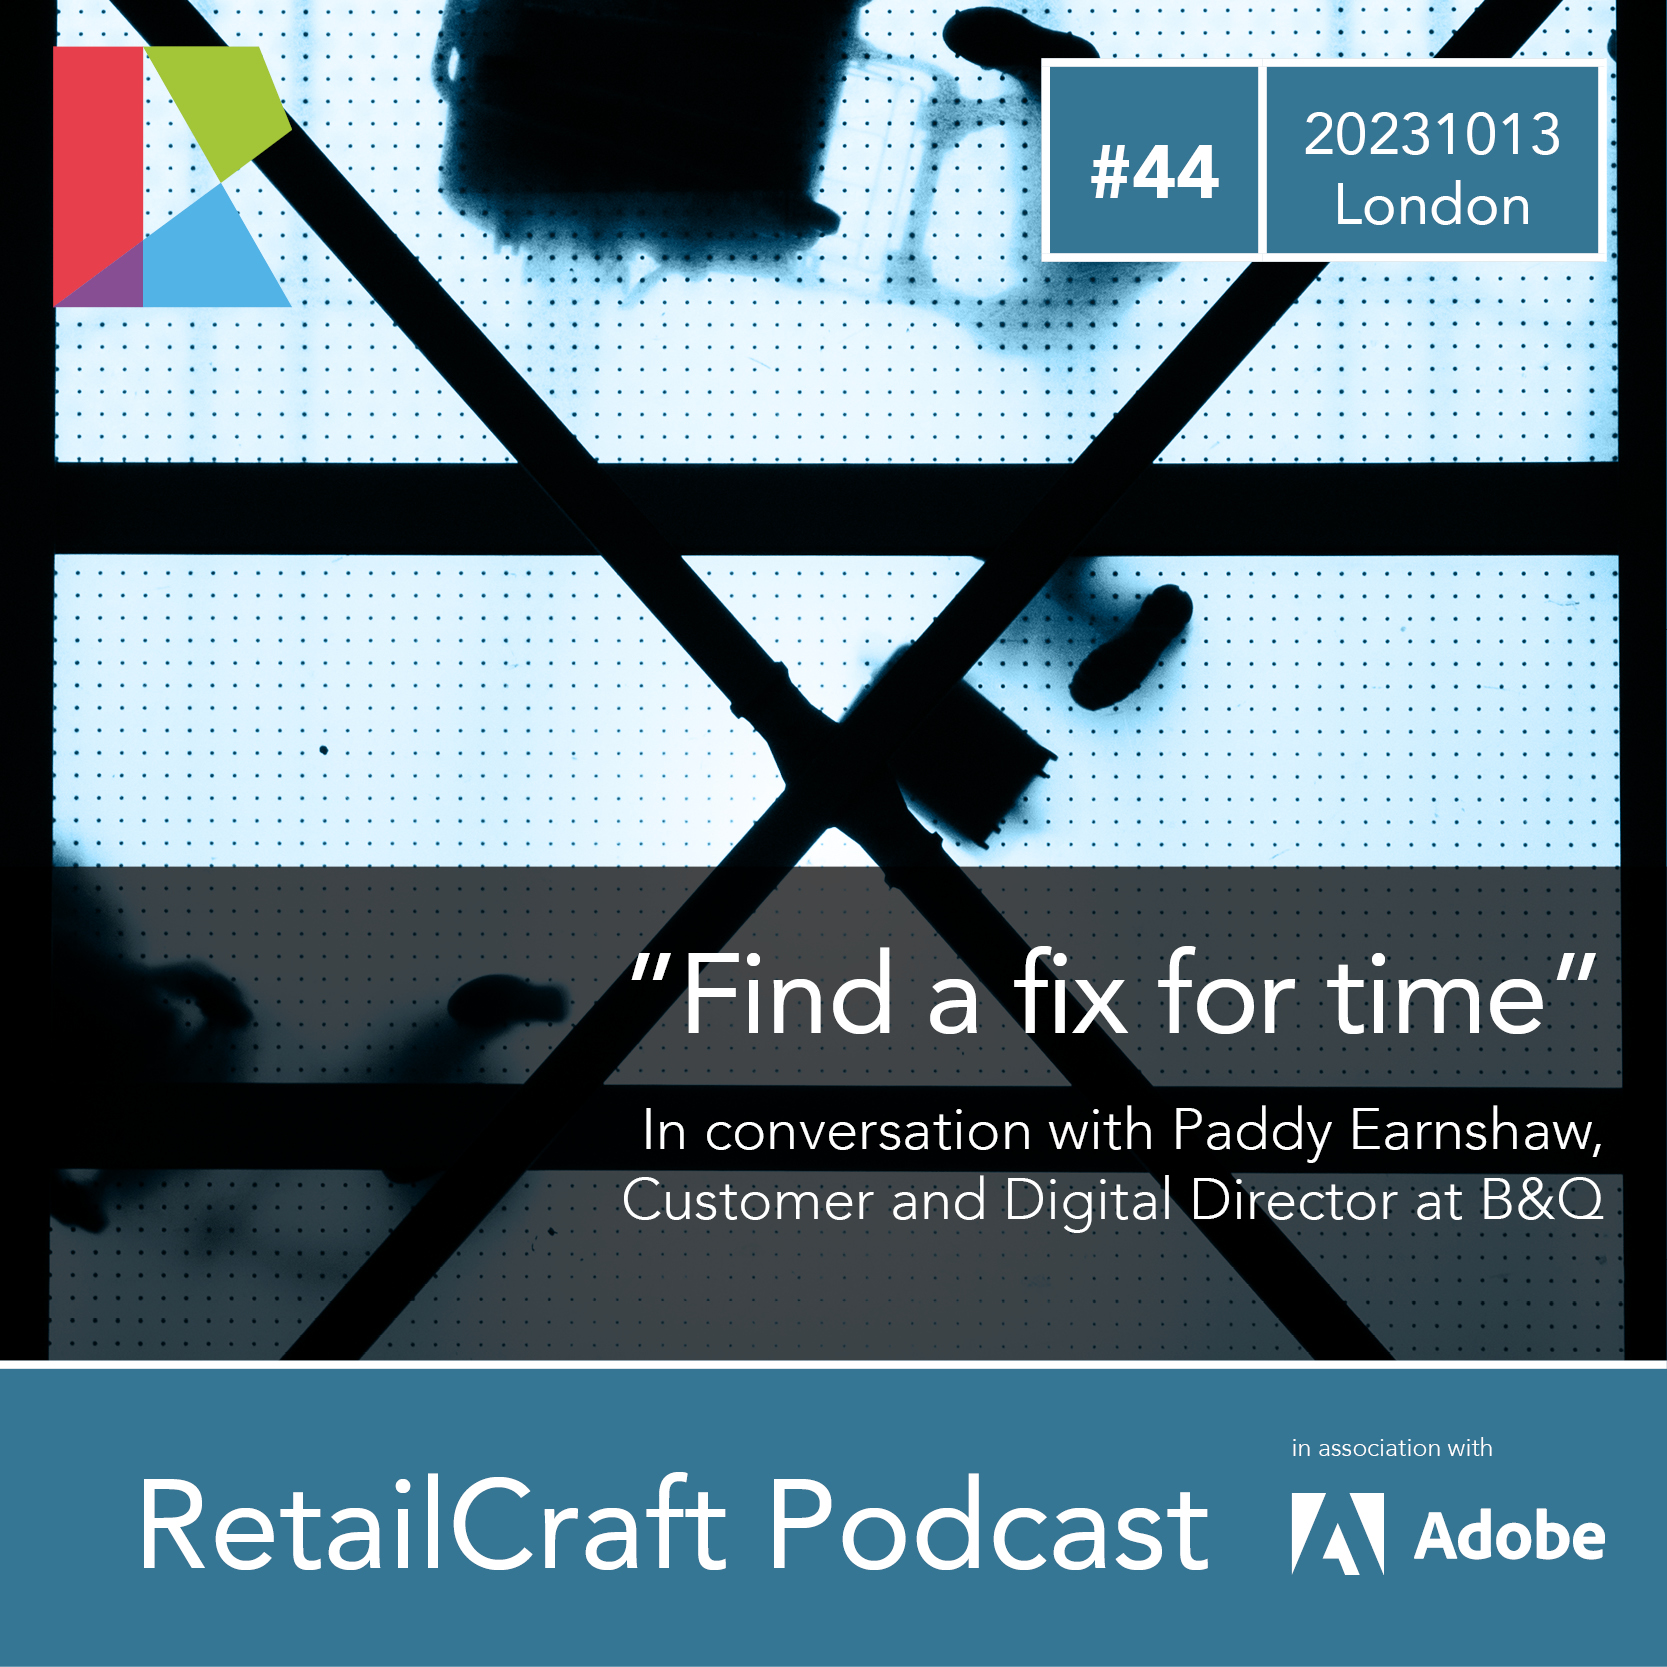 RetailCraft Podcast #44 – ”Find a fix for time” – in conversation with Paddy Earnshaw, Customer and Digital Director at B&Q